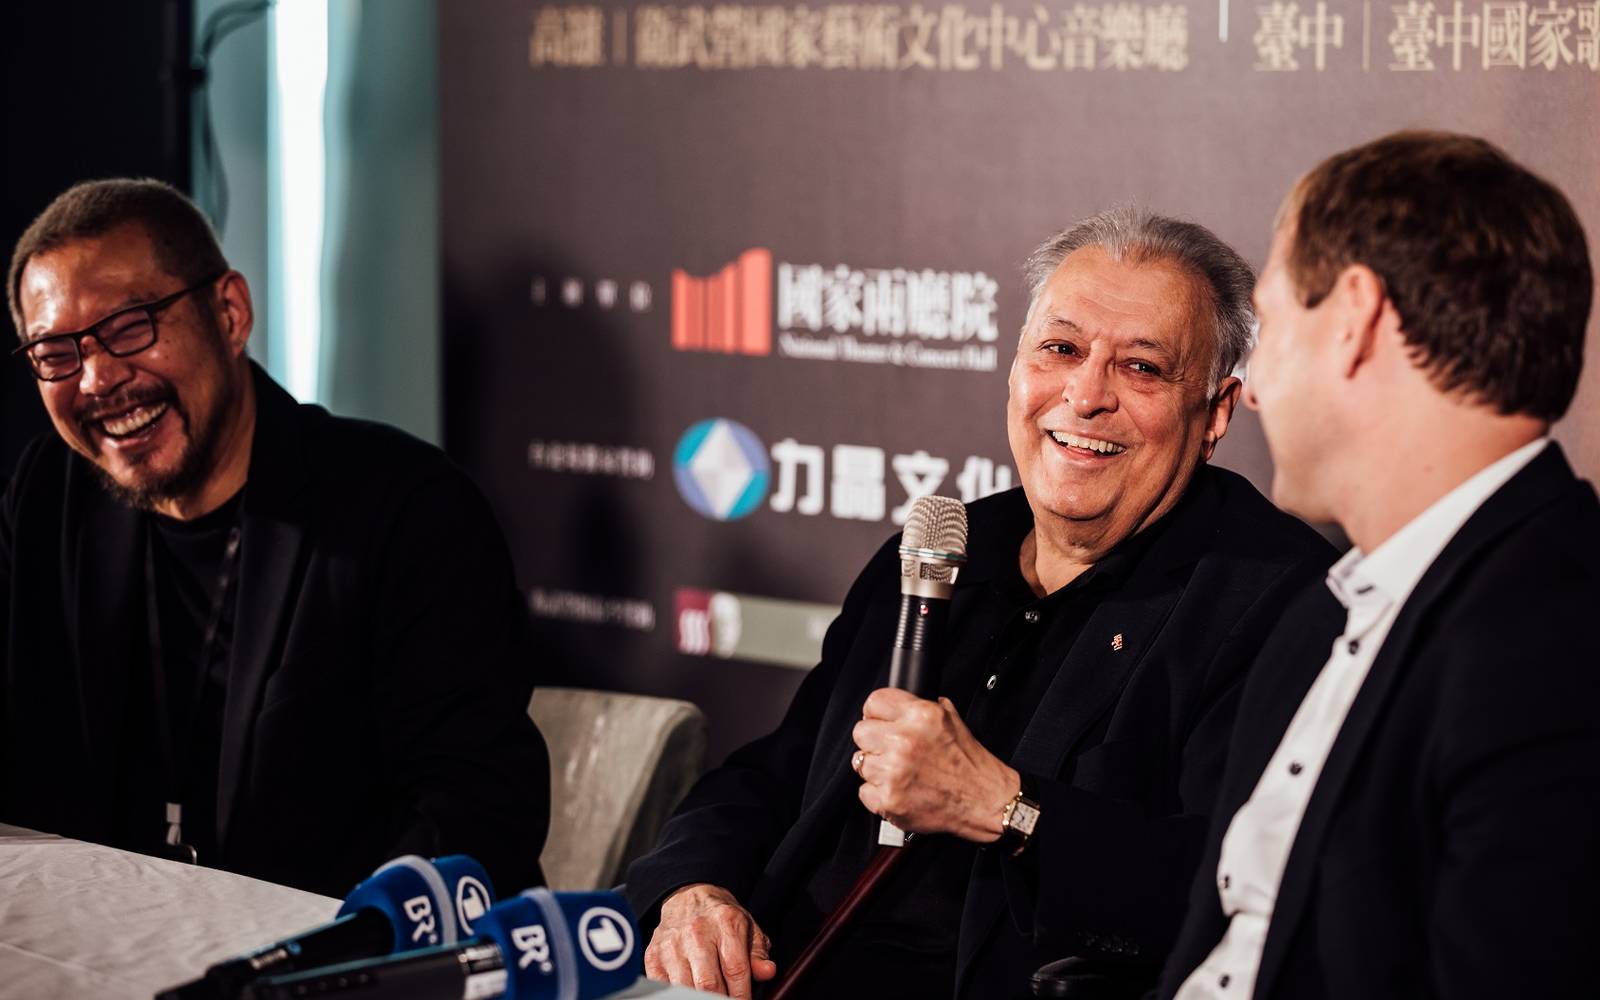 The First Ever Collaboration Of Weiwuying National Center For The Arts, National Taichung Theater And National Theater And Concert Hall--Zubin Mehta And Symphonieorchester Des Bayerischen Rundfunks Tours Taiwan Tomorrow